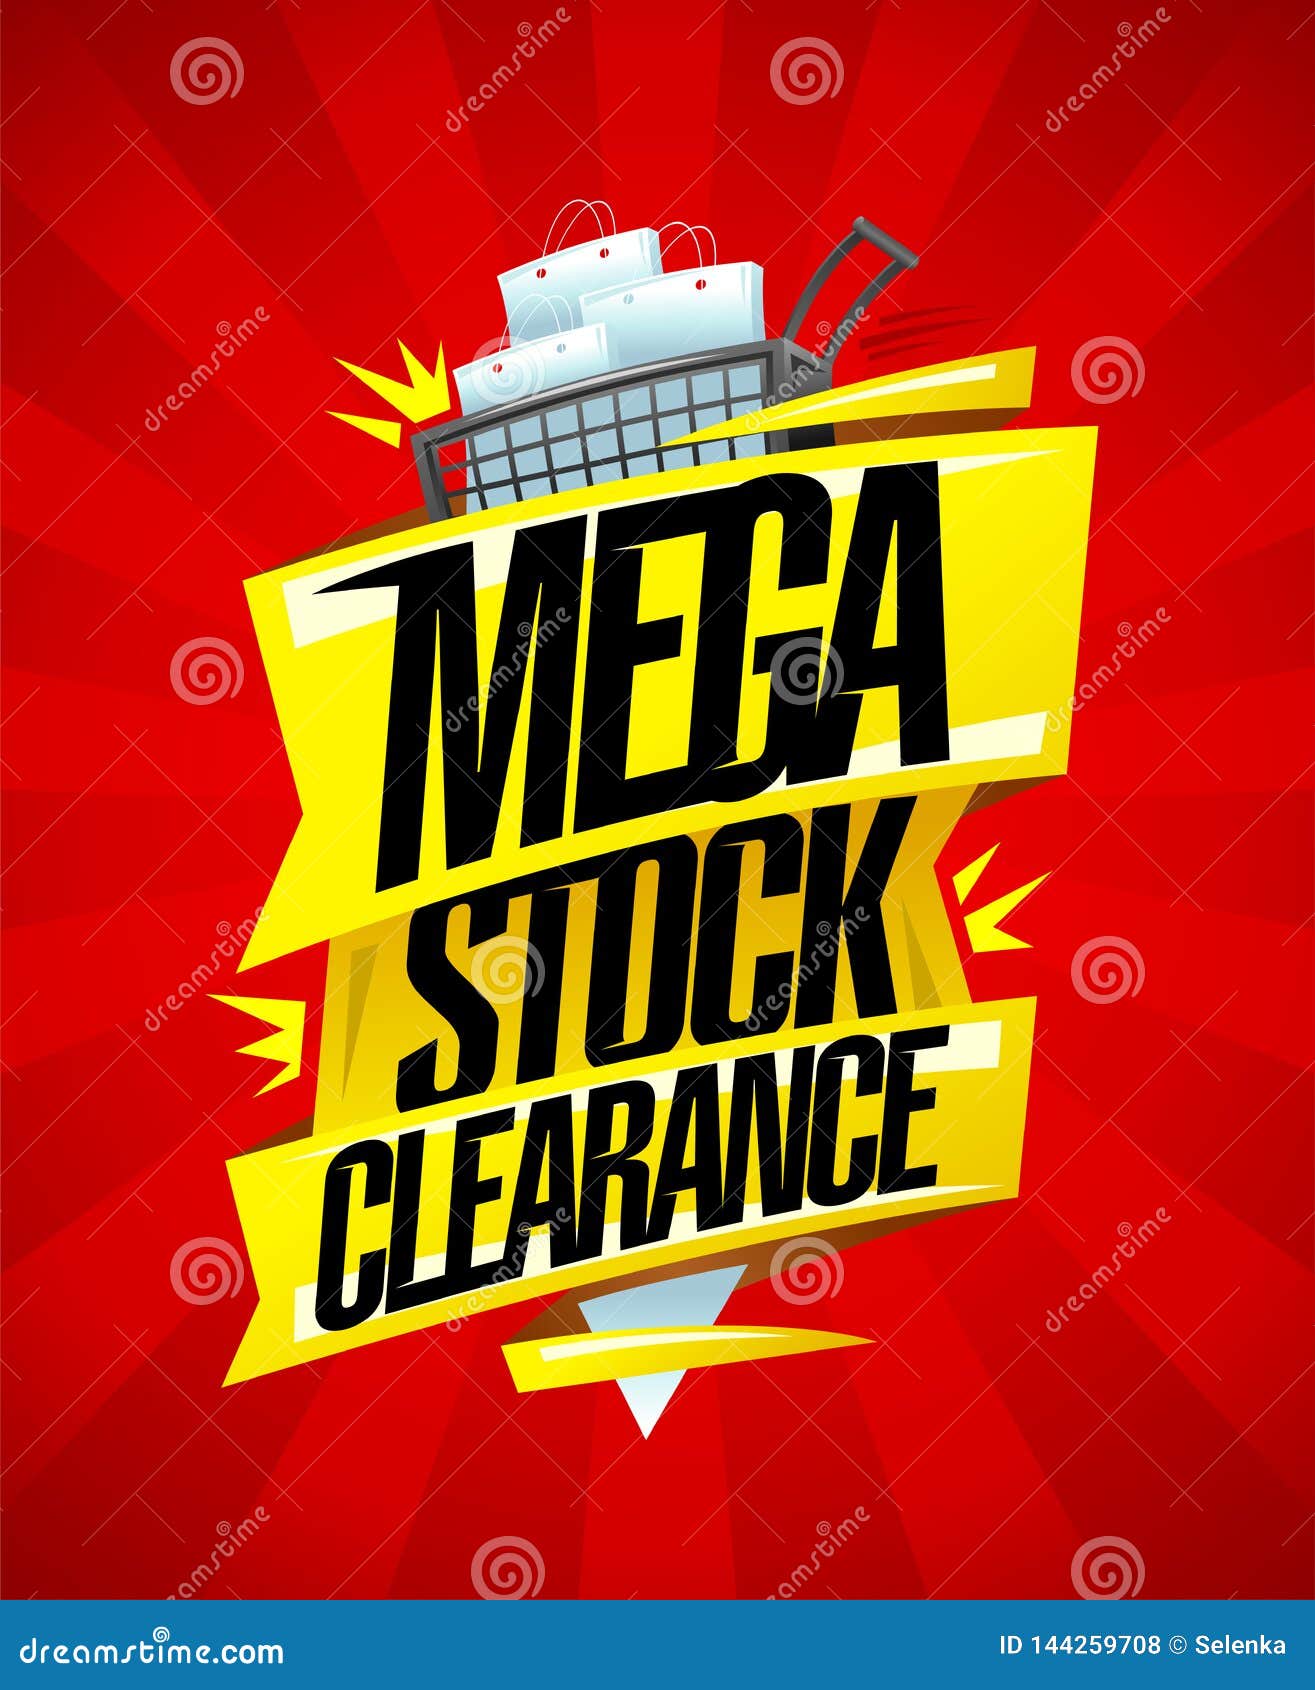 45,978 Stock Clearance Banner Images, Stock Photos, 3D objects, & Vectors